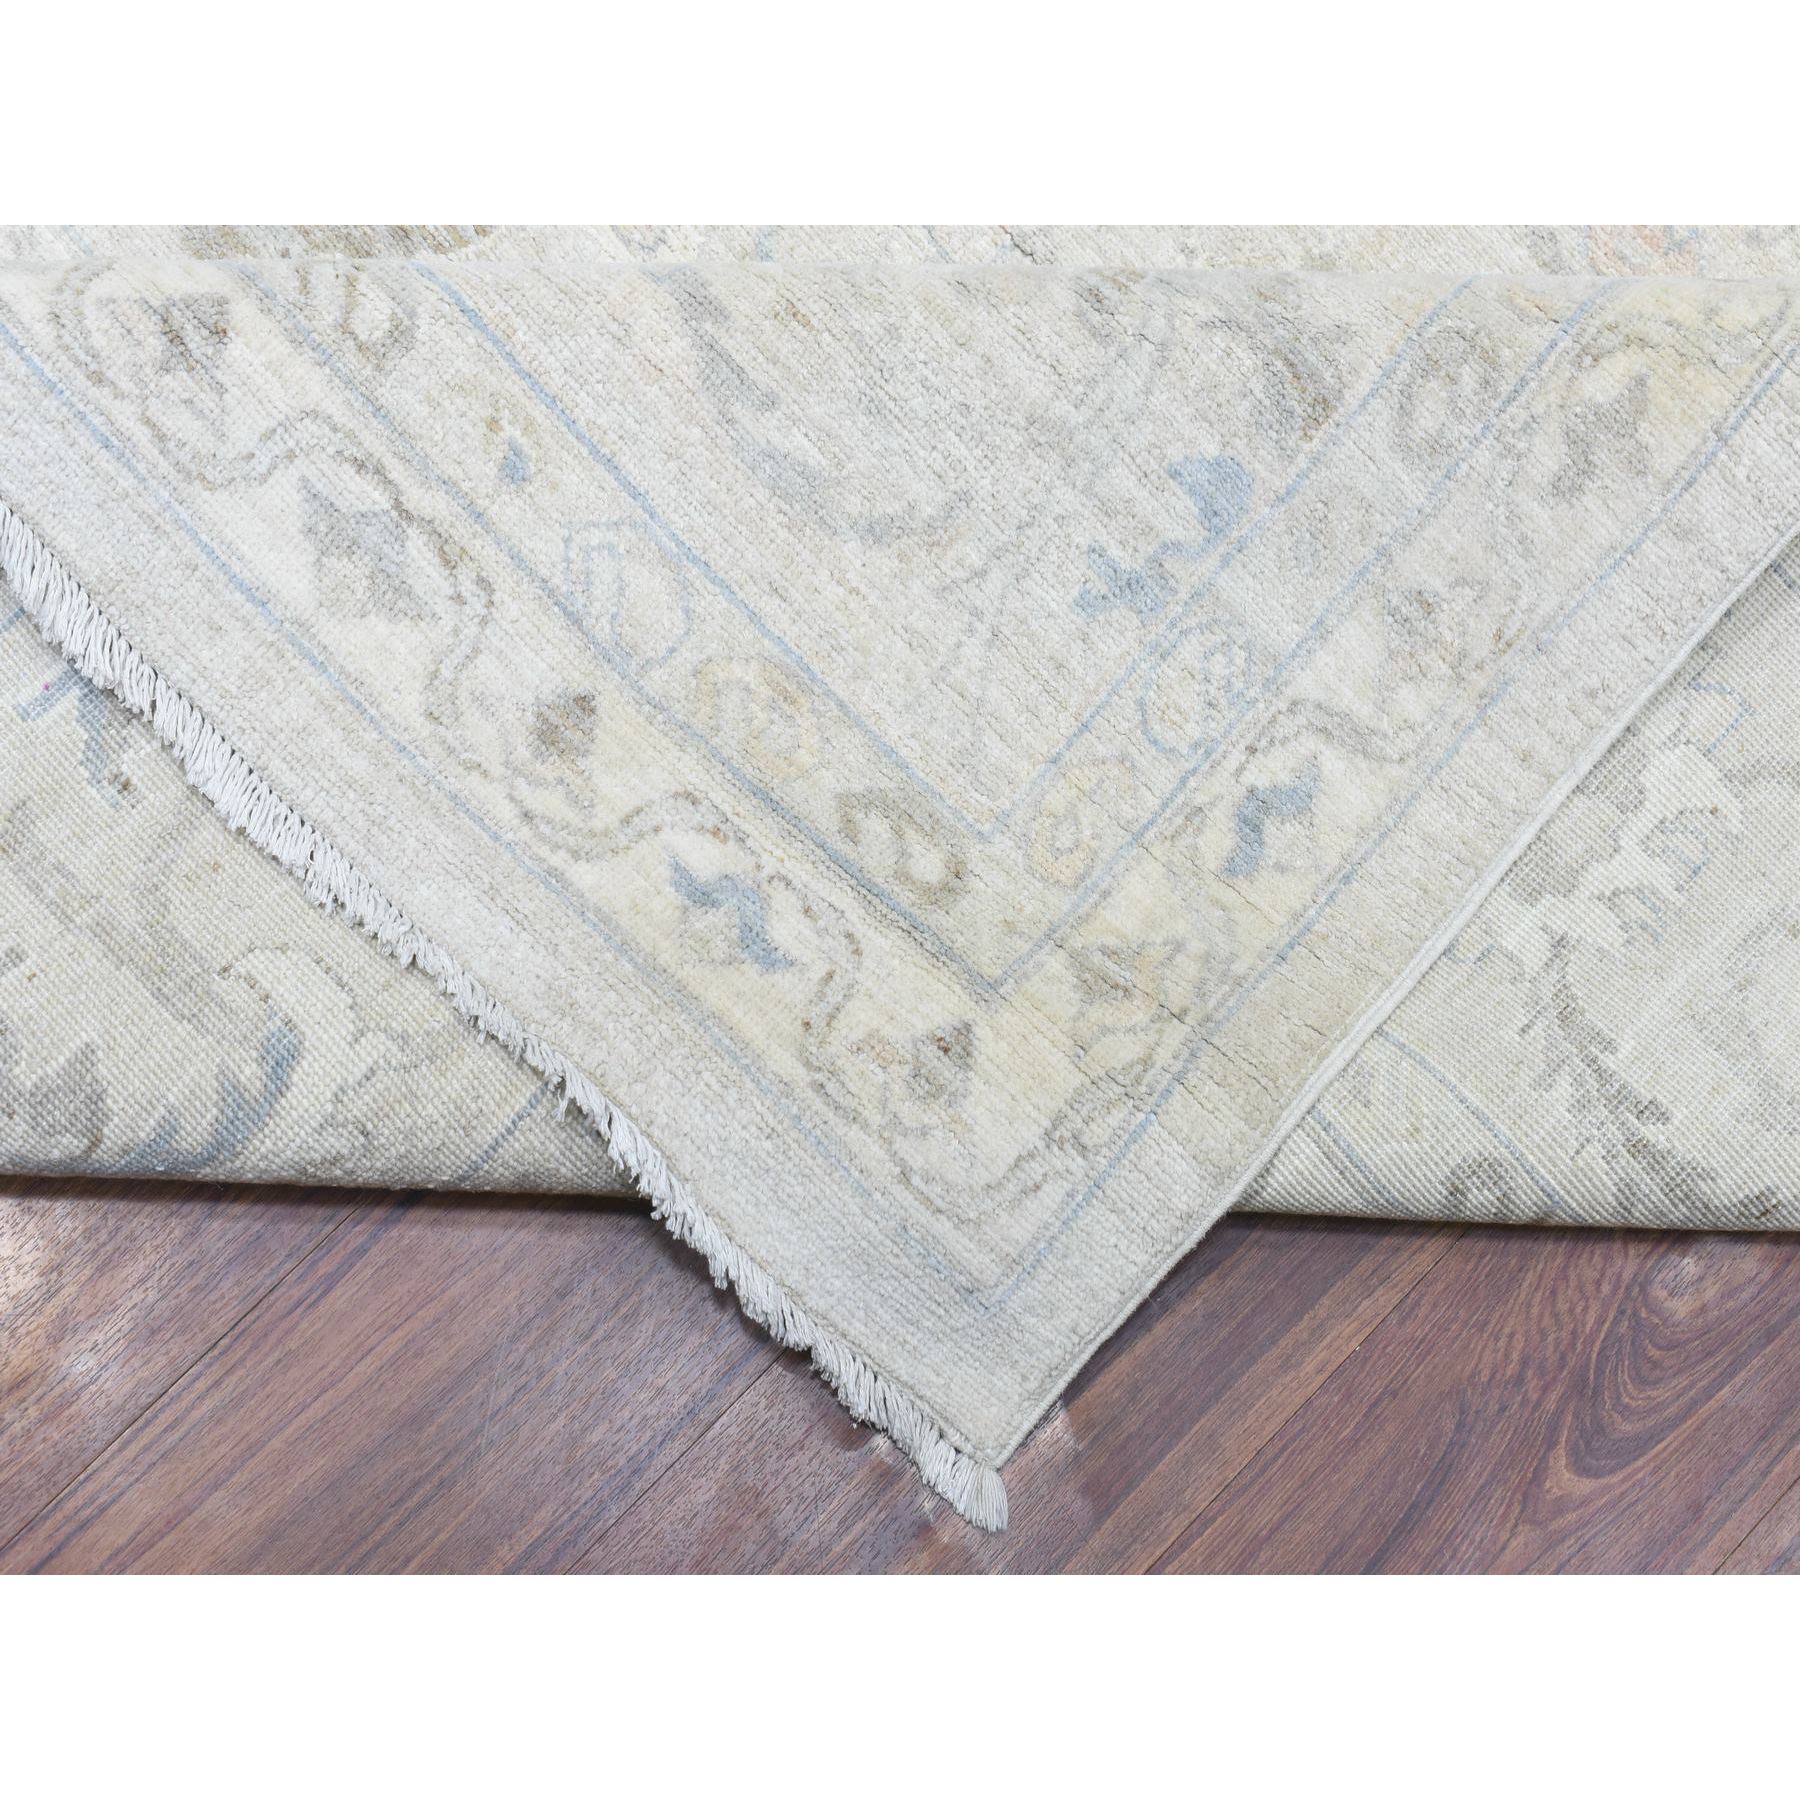 10'8"x14'6" Light Gray, White Wash Peshawar Natural Dyes, Soft and Shiny Wool Hand Woven, Oversized Oriental Rug 